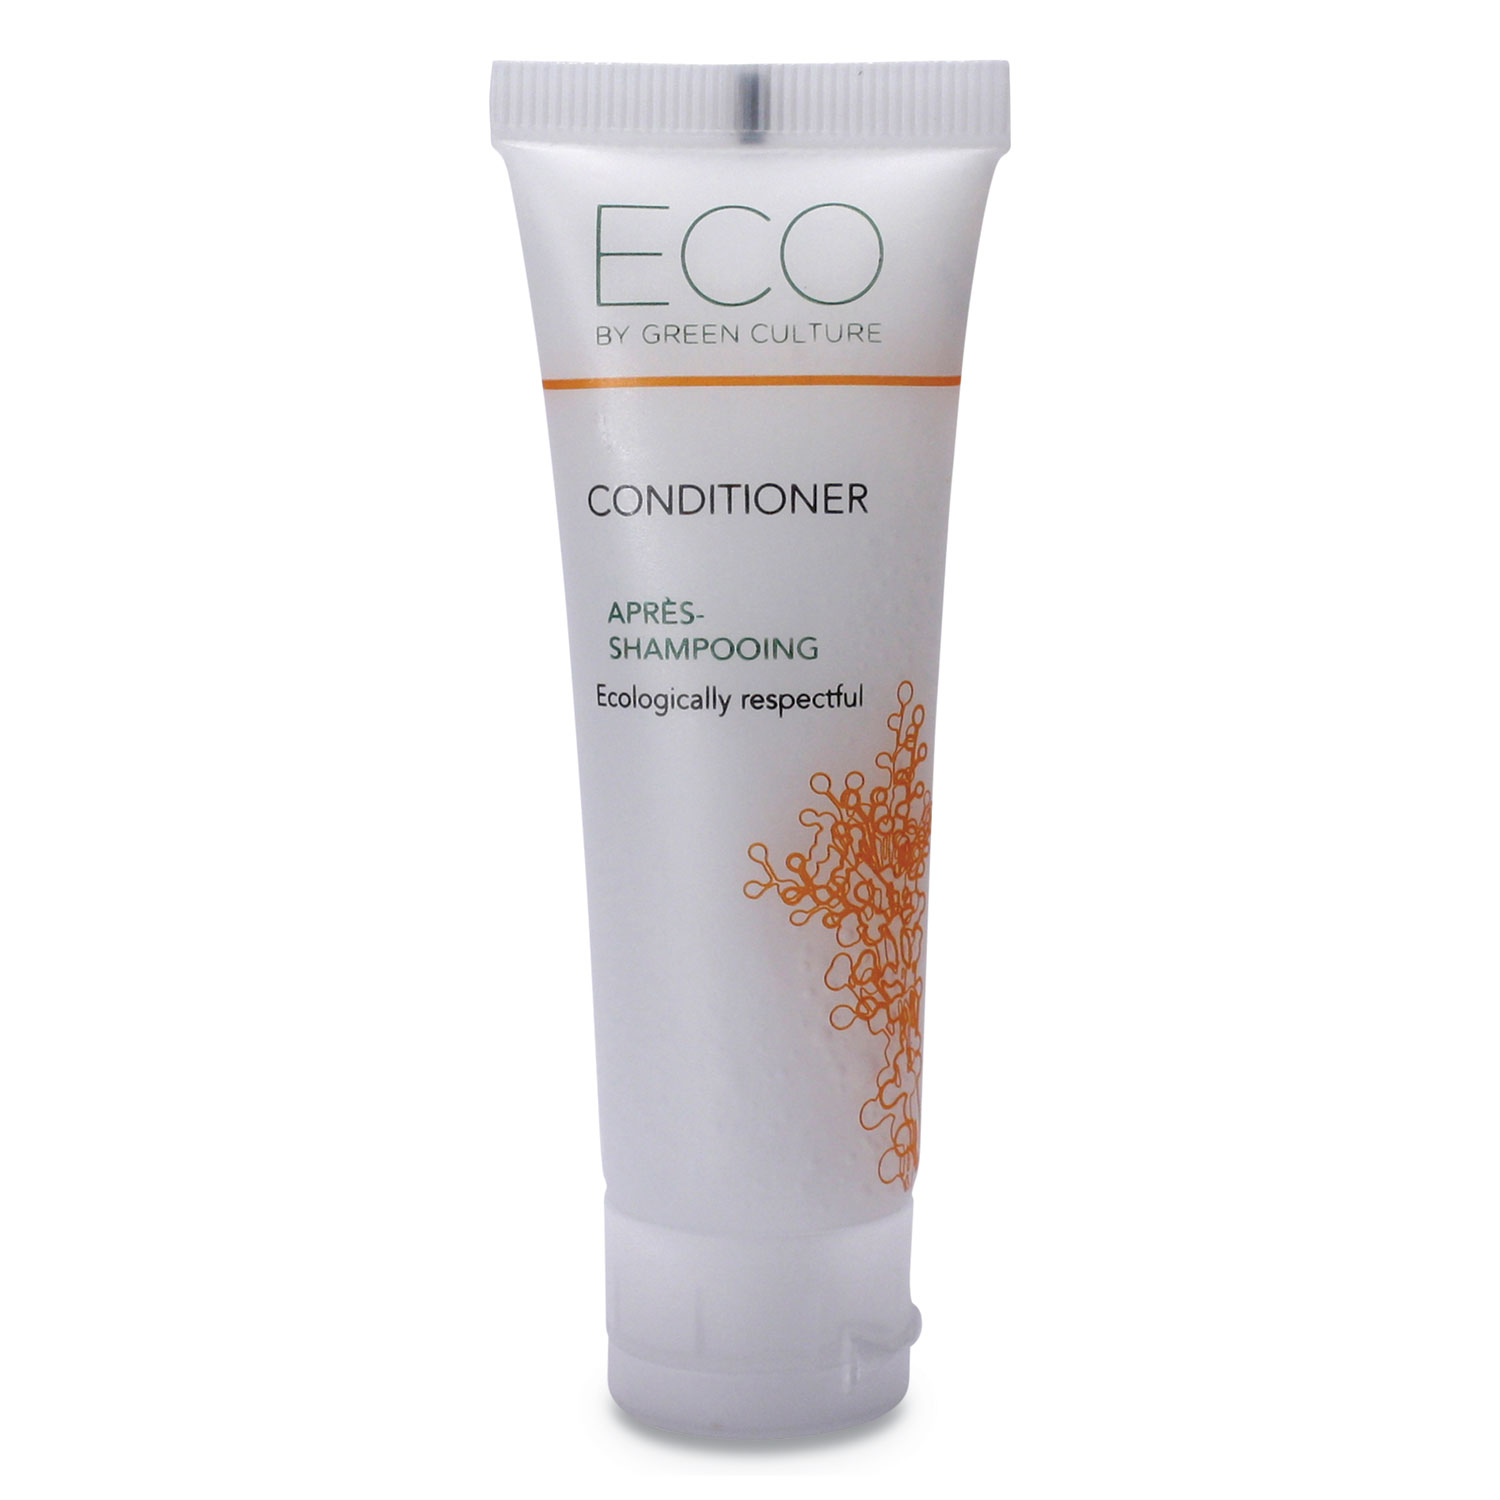  Eco By Green Culture CD-EGC-T Condtioner, Clean Scent, 30mL, 288/Carton (OGFCDEGCT) 